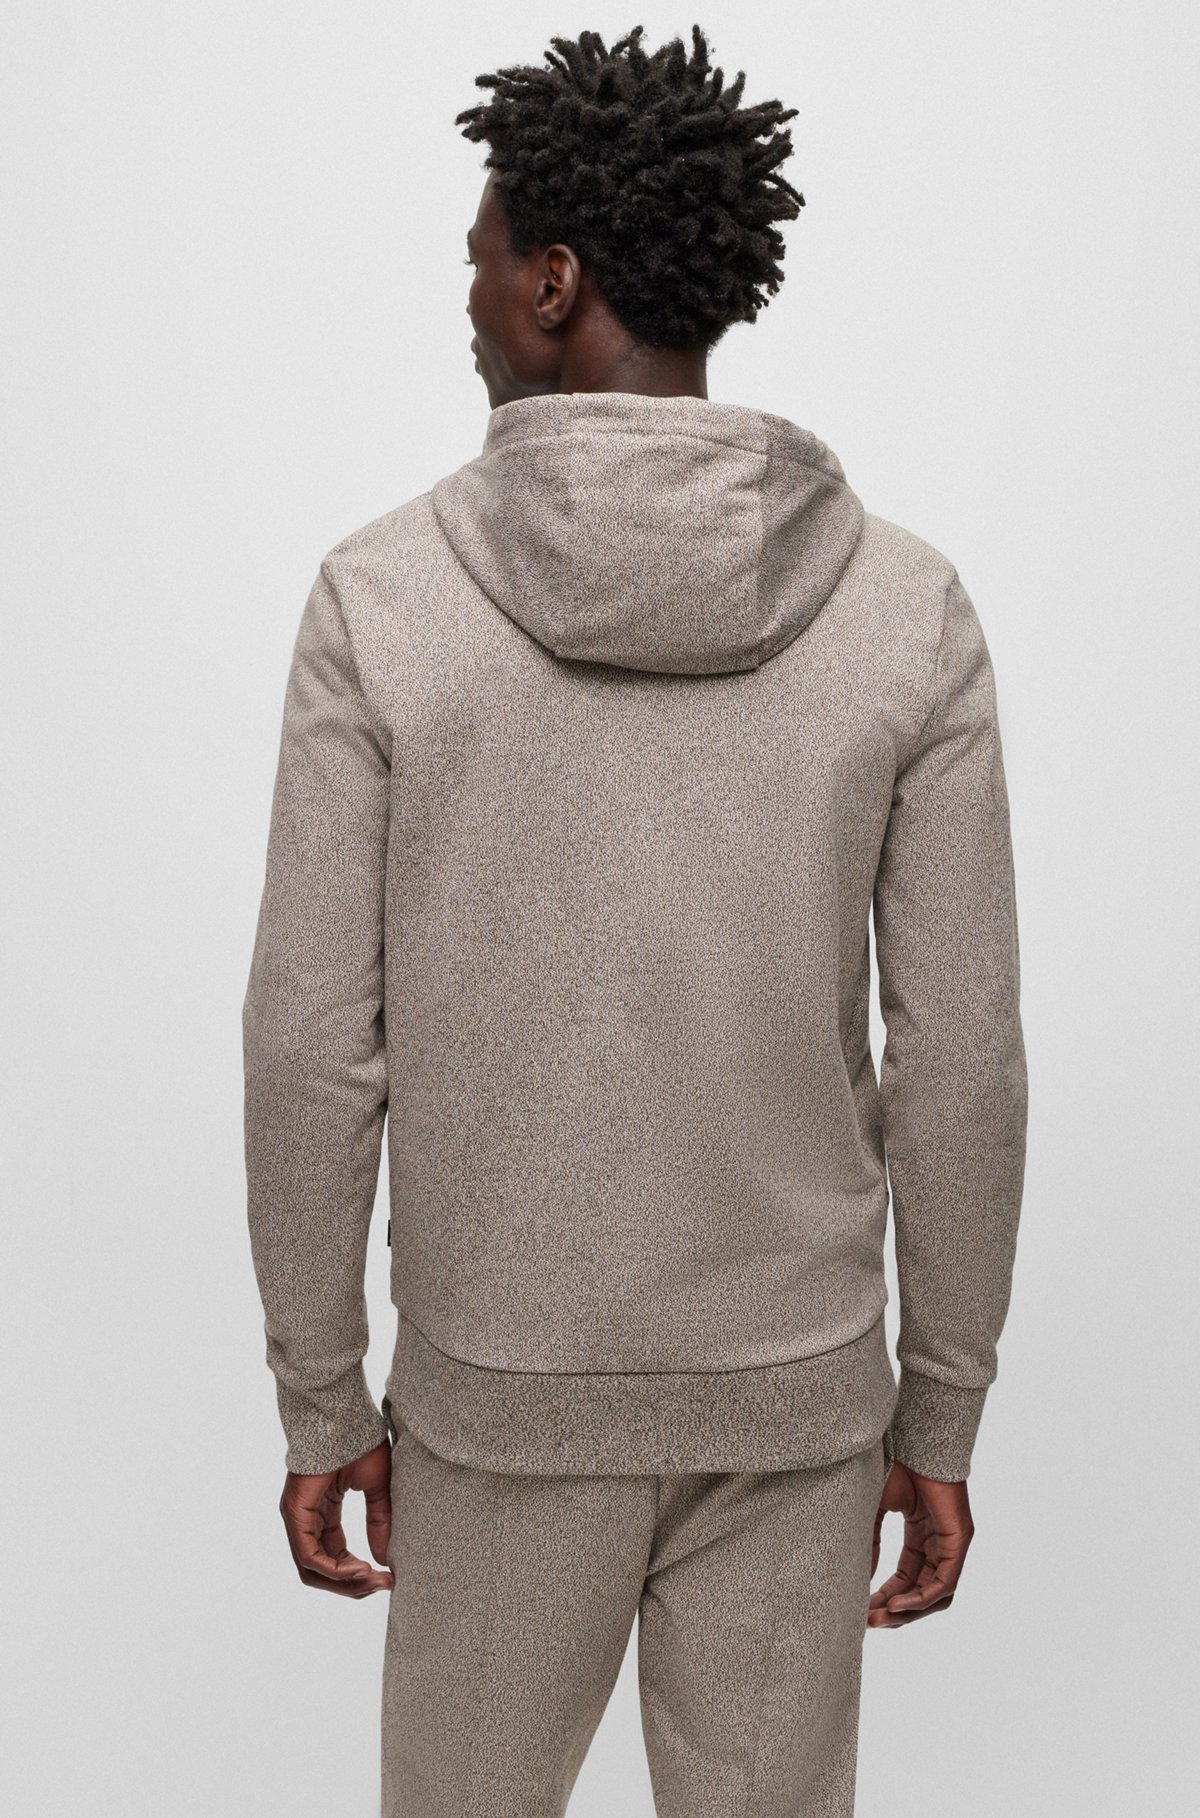 Regular-fit zip-up hoodie in mouliné French terry, Beige